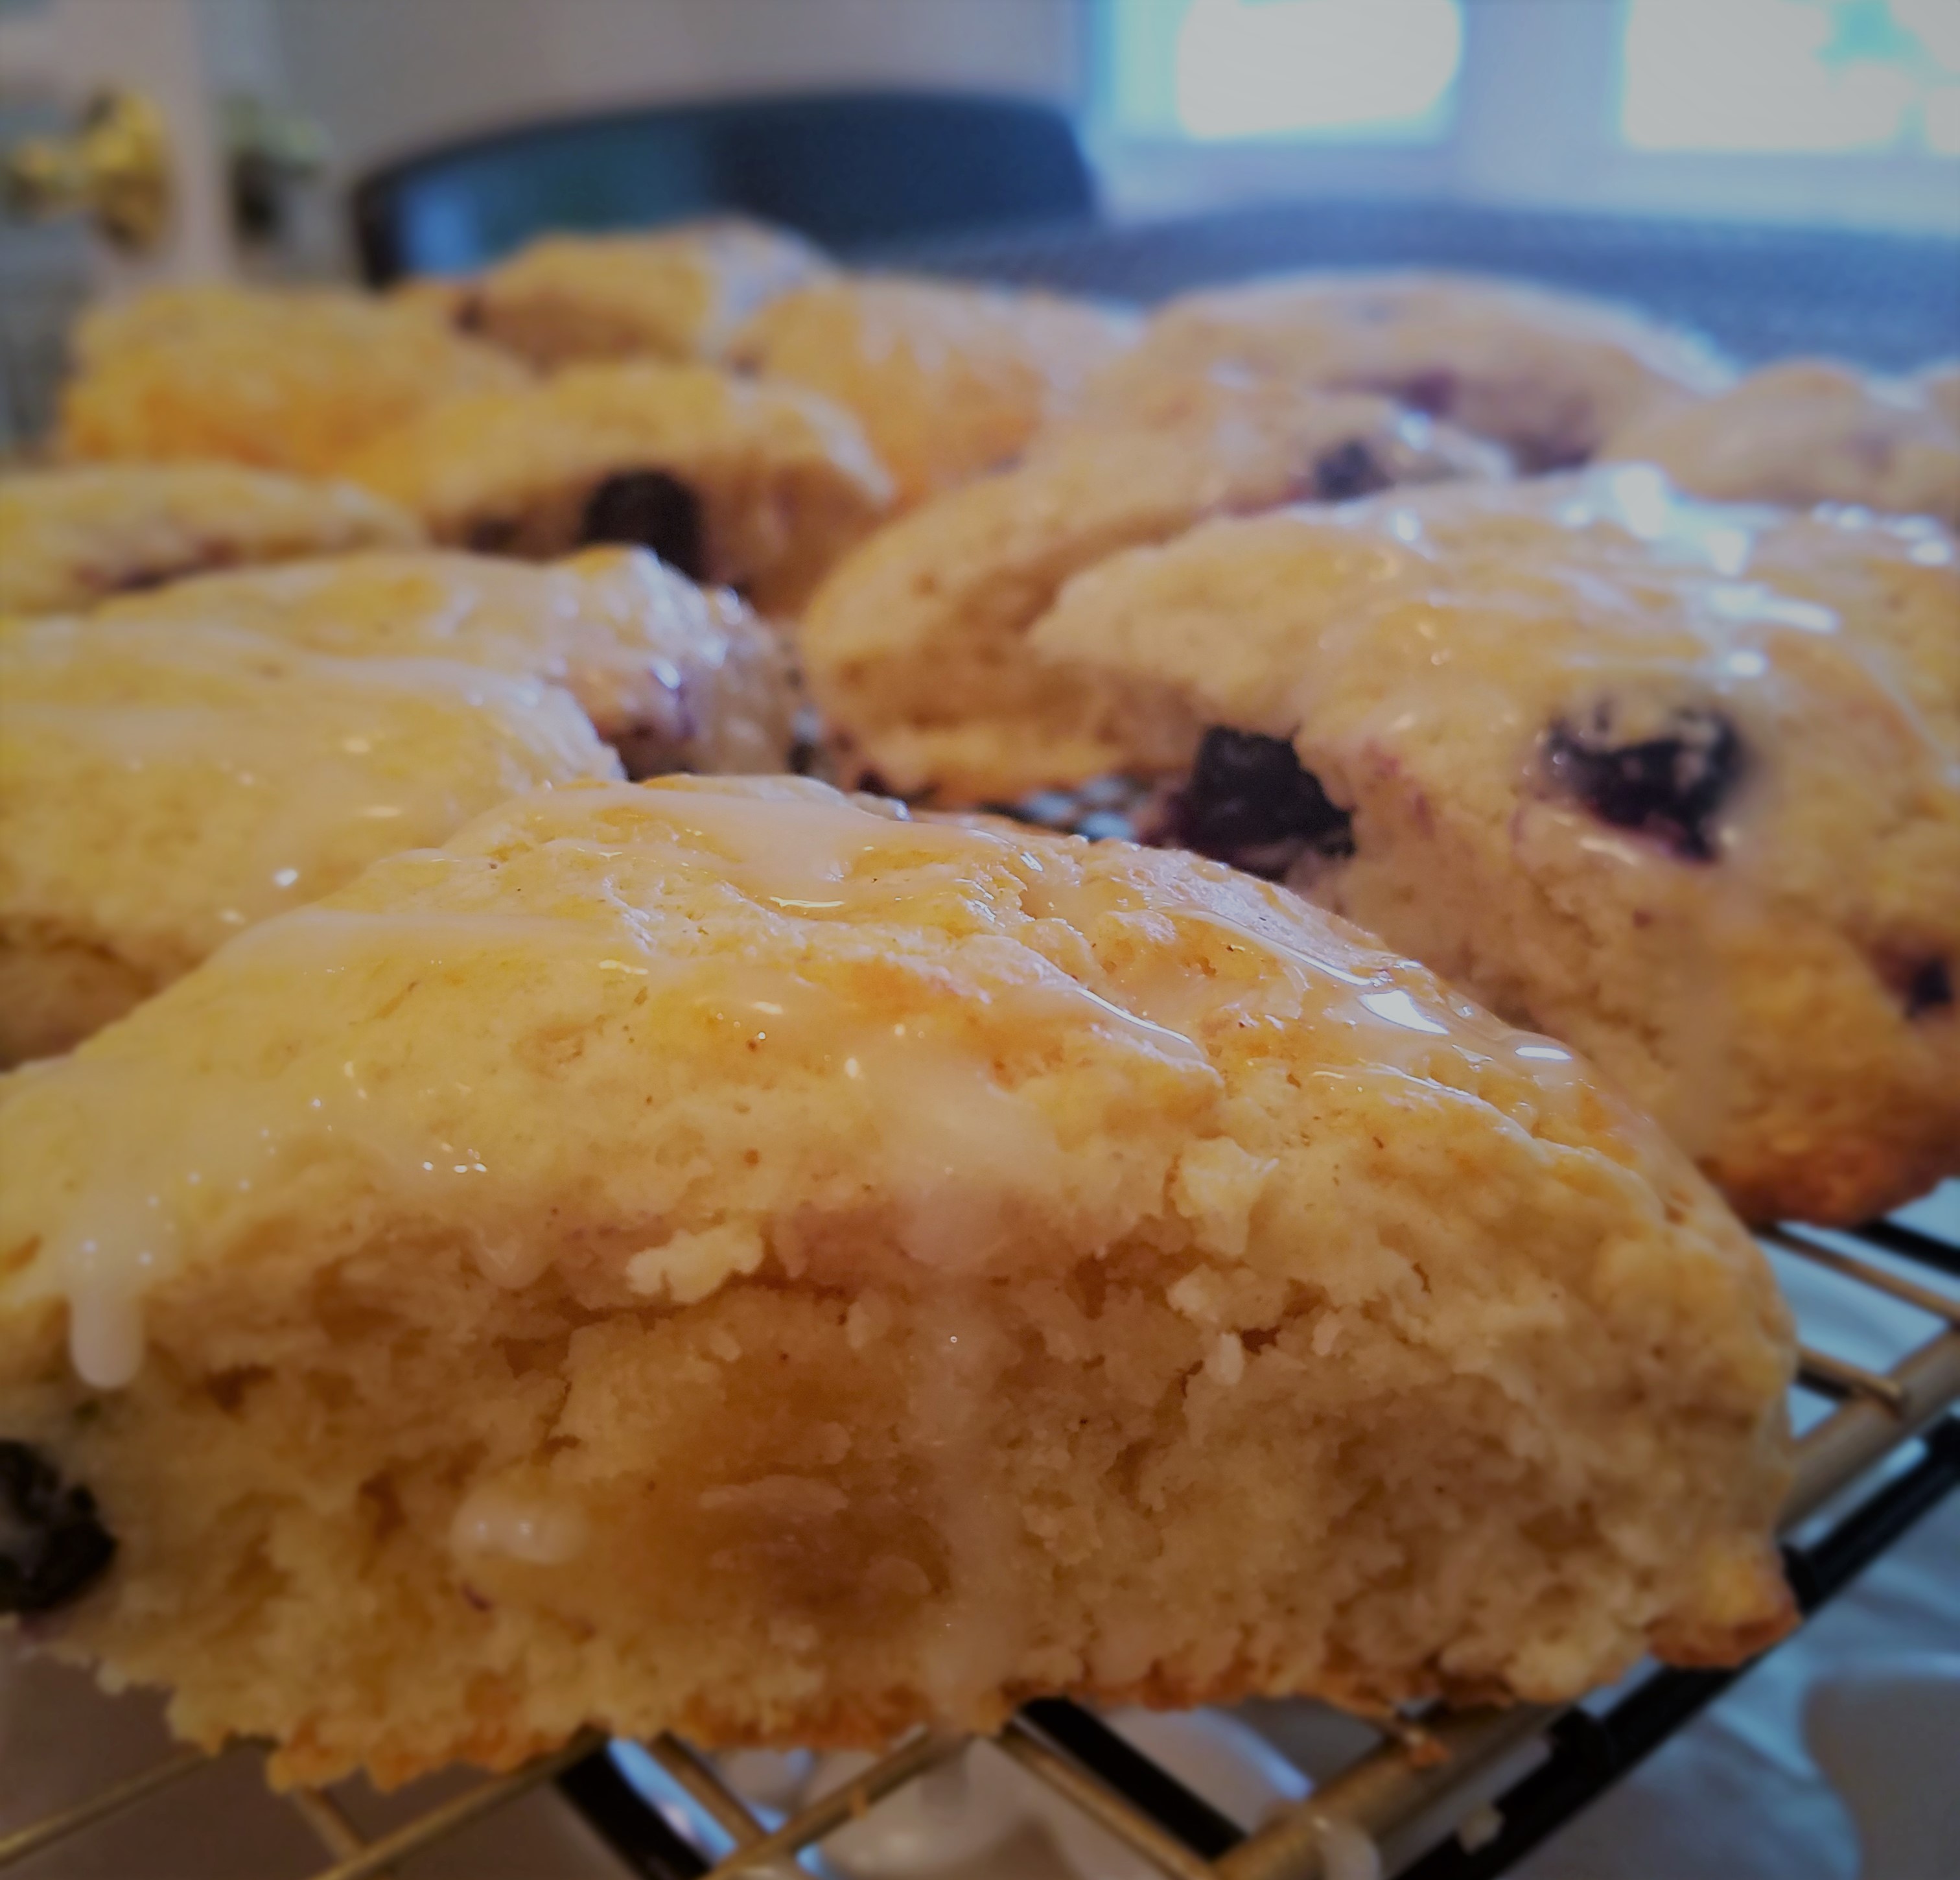 Blueberry Almond Scones (Recipe inspired by THE ROAD TO LITTLE DRIBBLING)